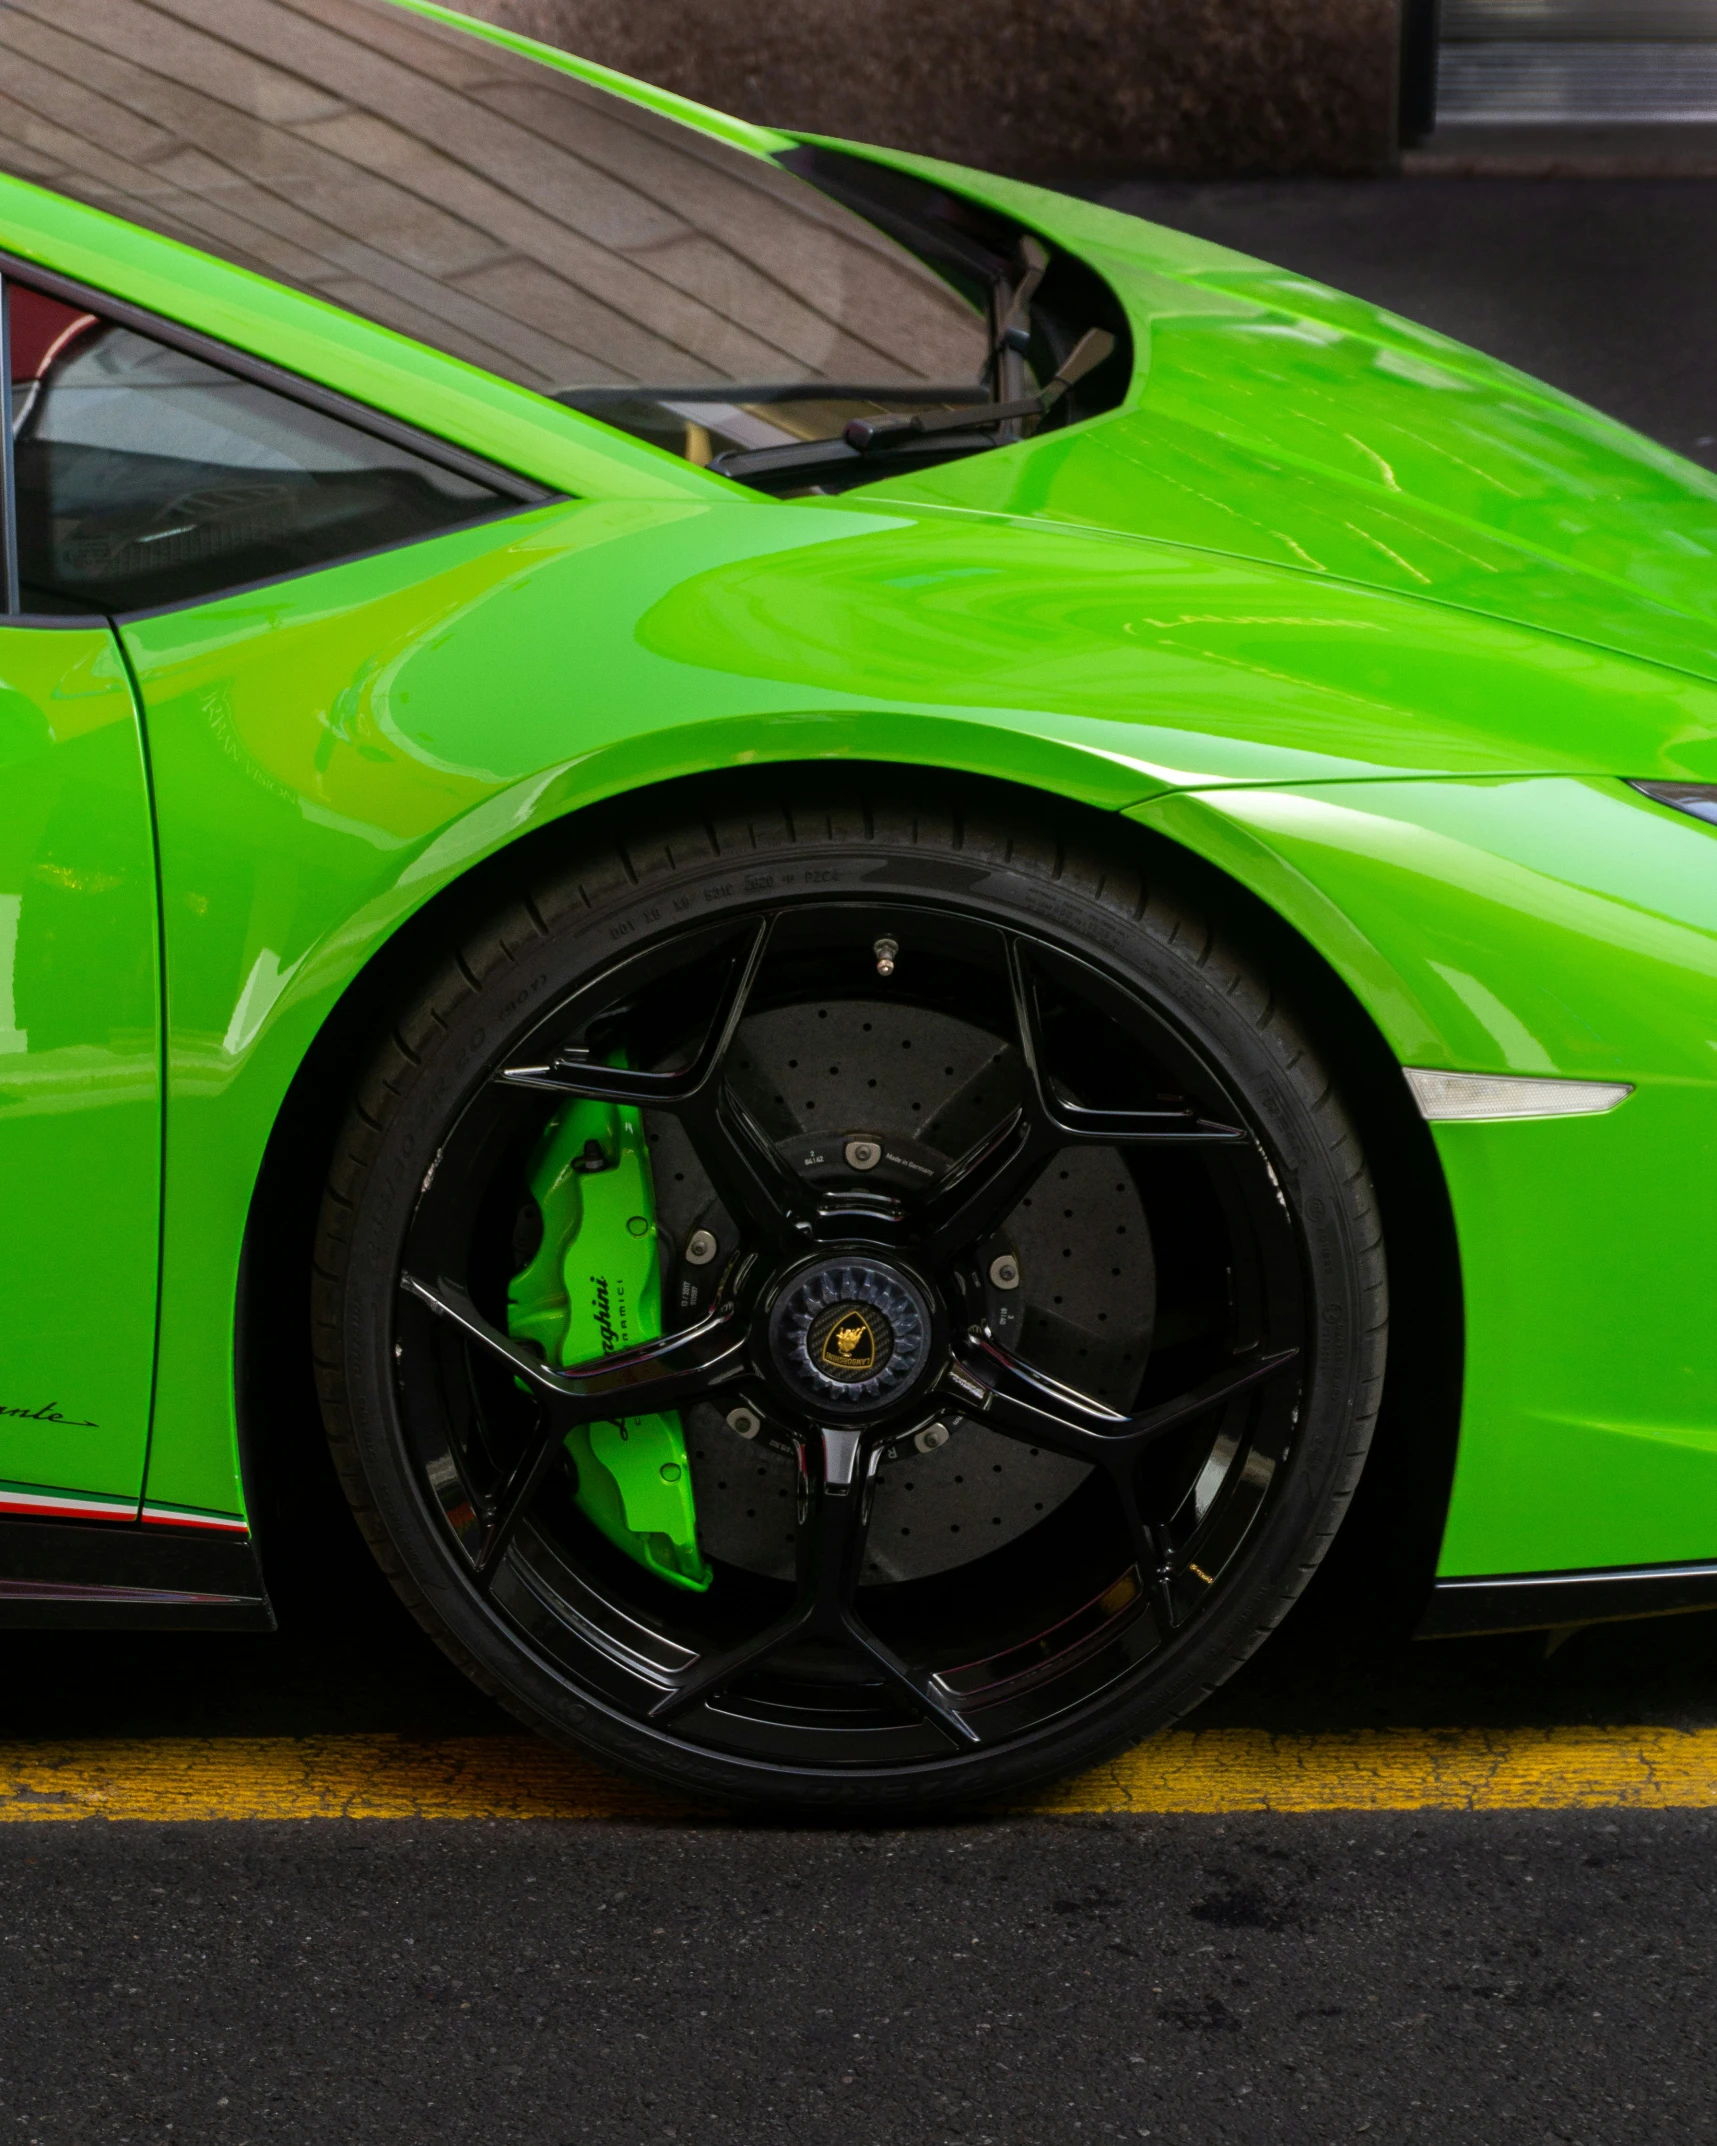 this car is lime green and has dark rims